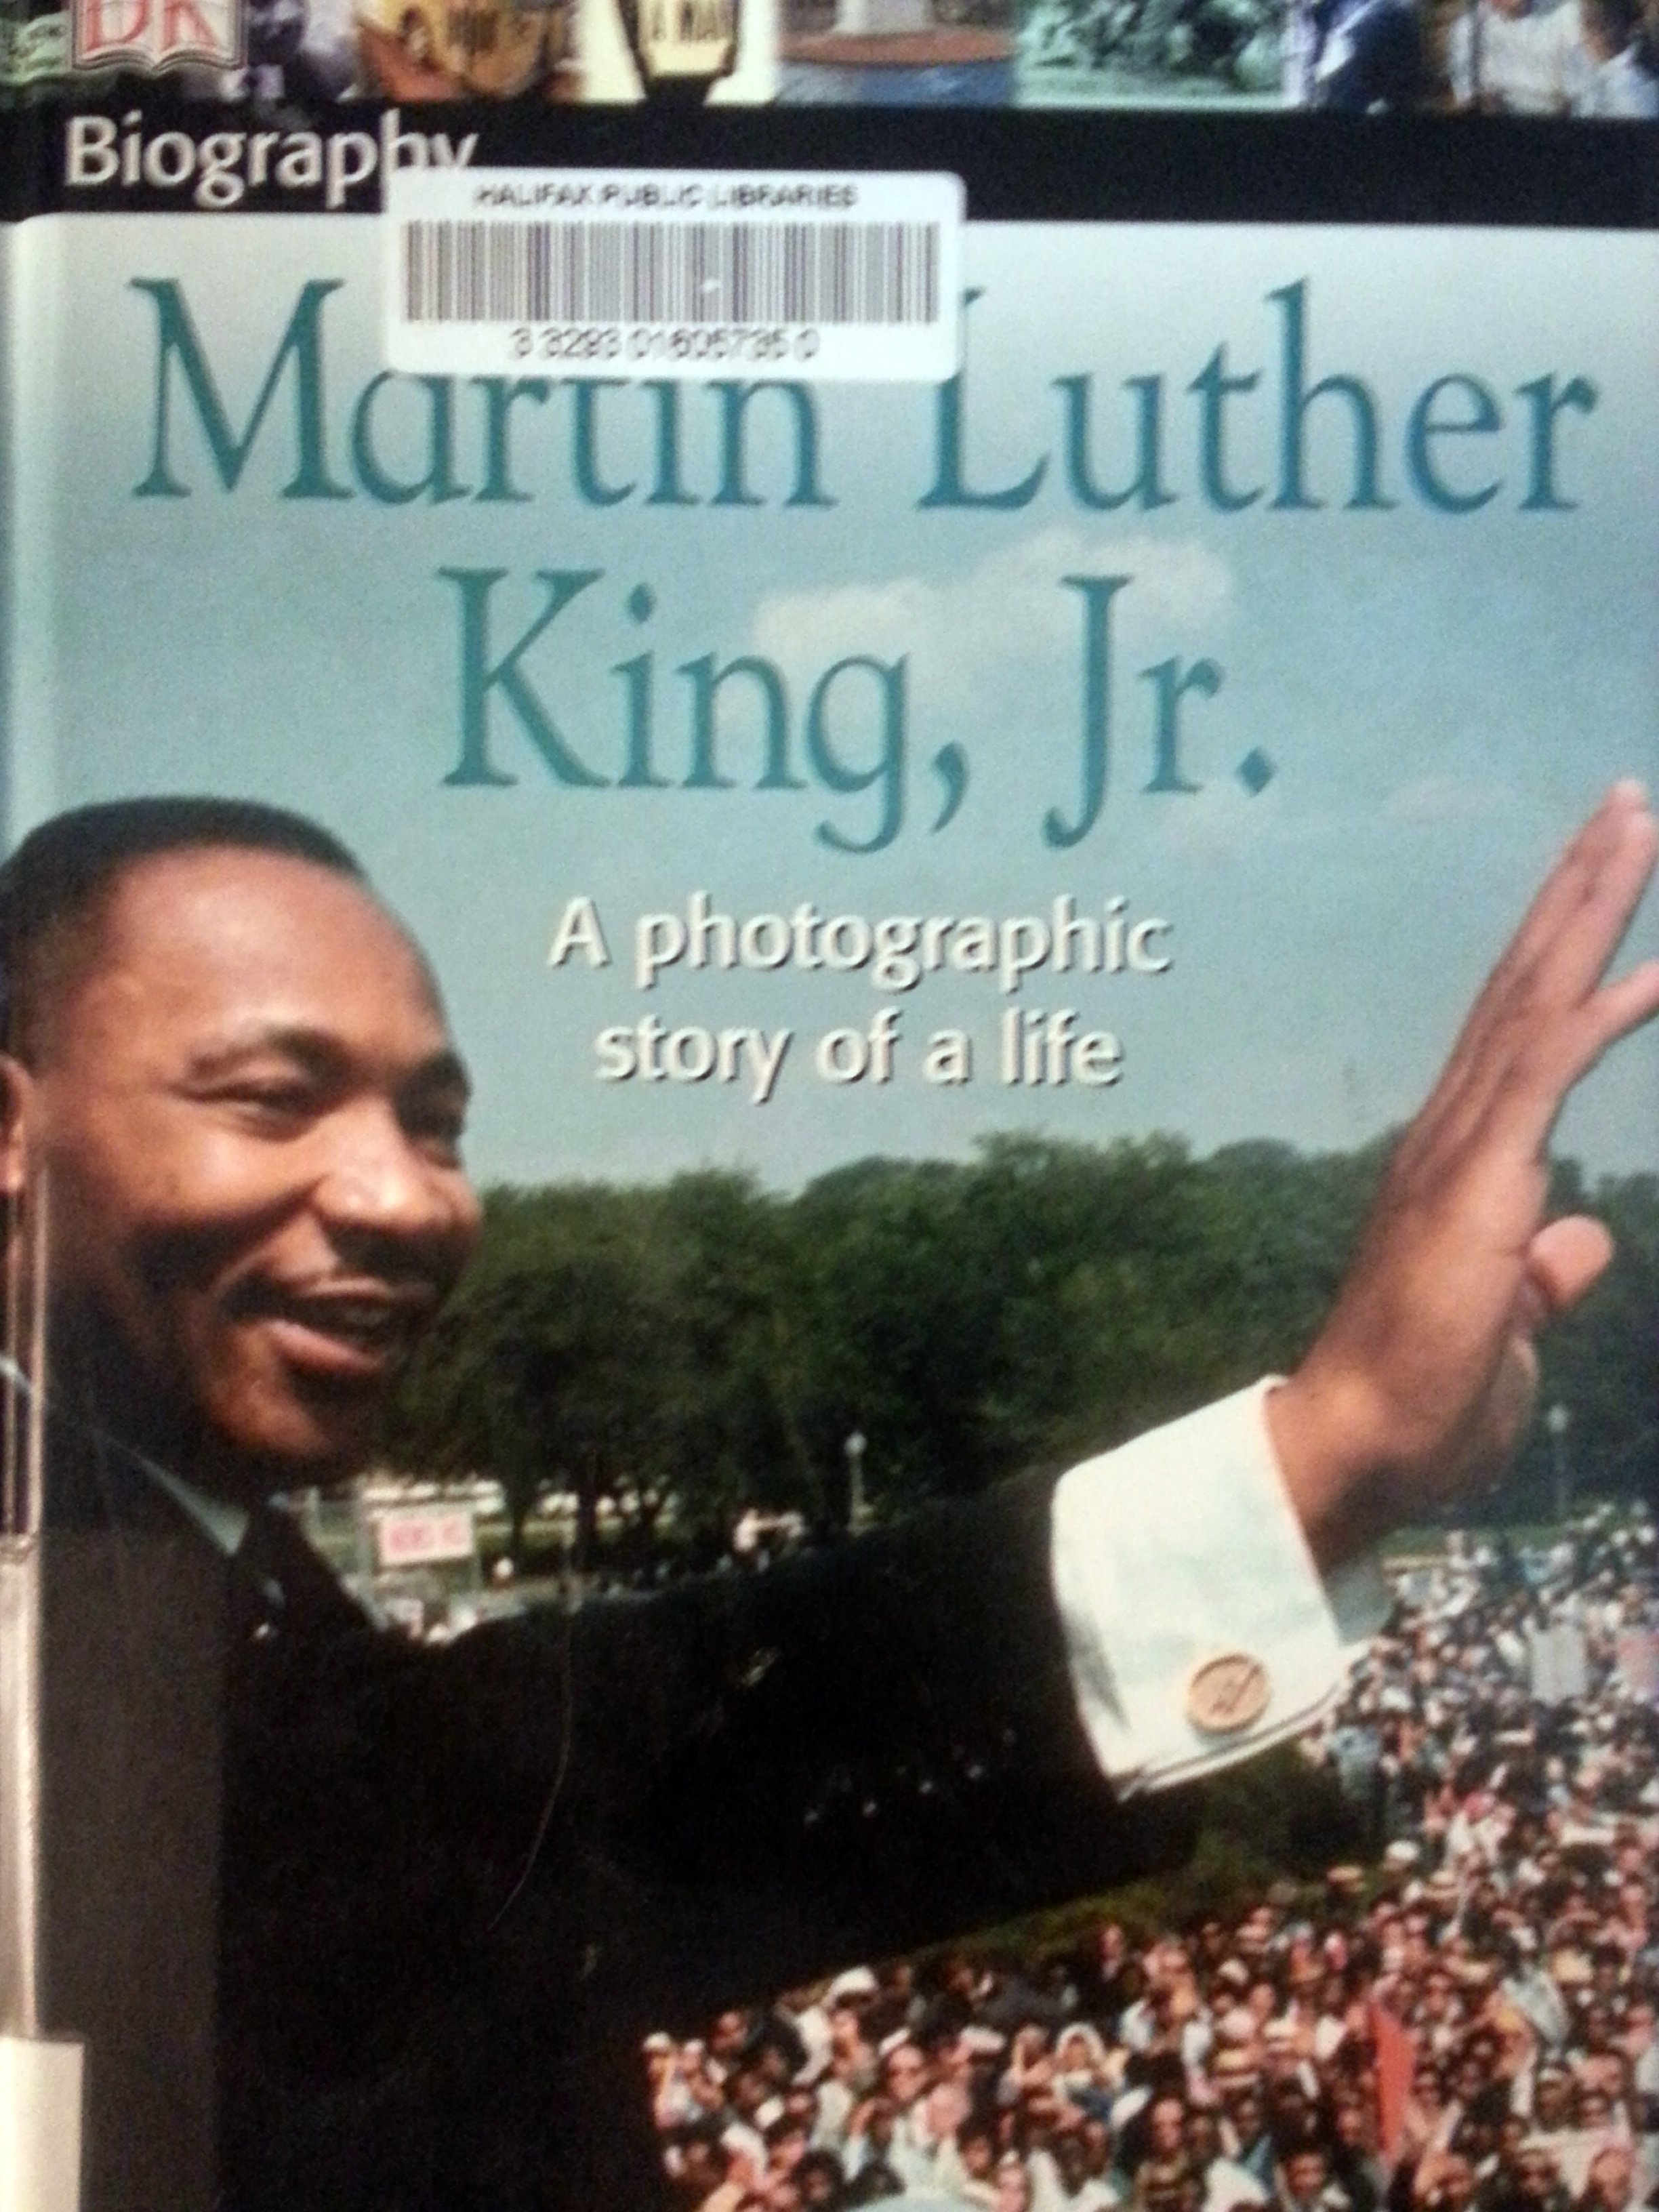 Martin Luther King, Jr. A photographic story of a life by Amy Pastan and Primo Levi ...